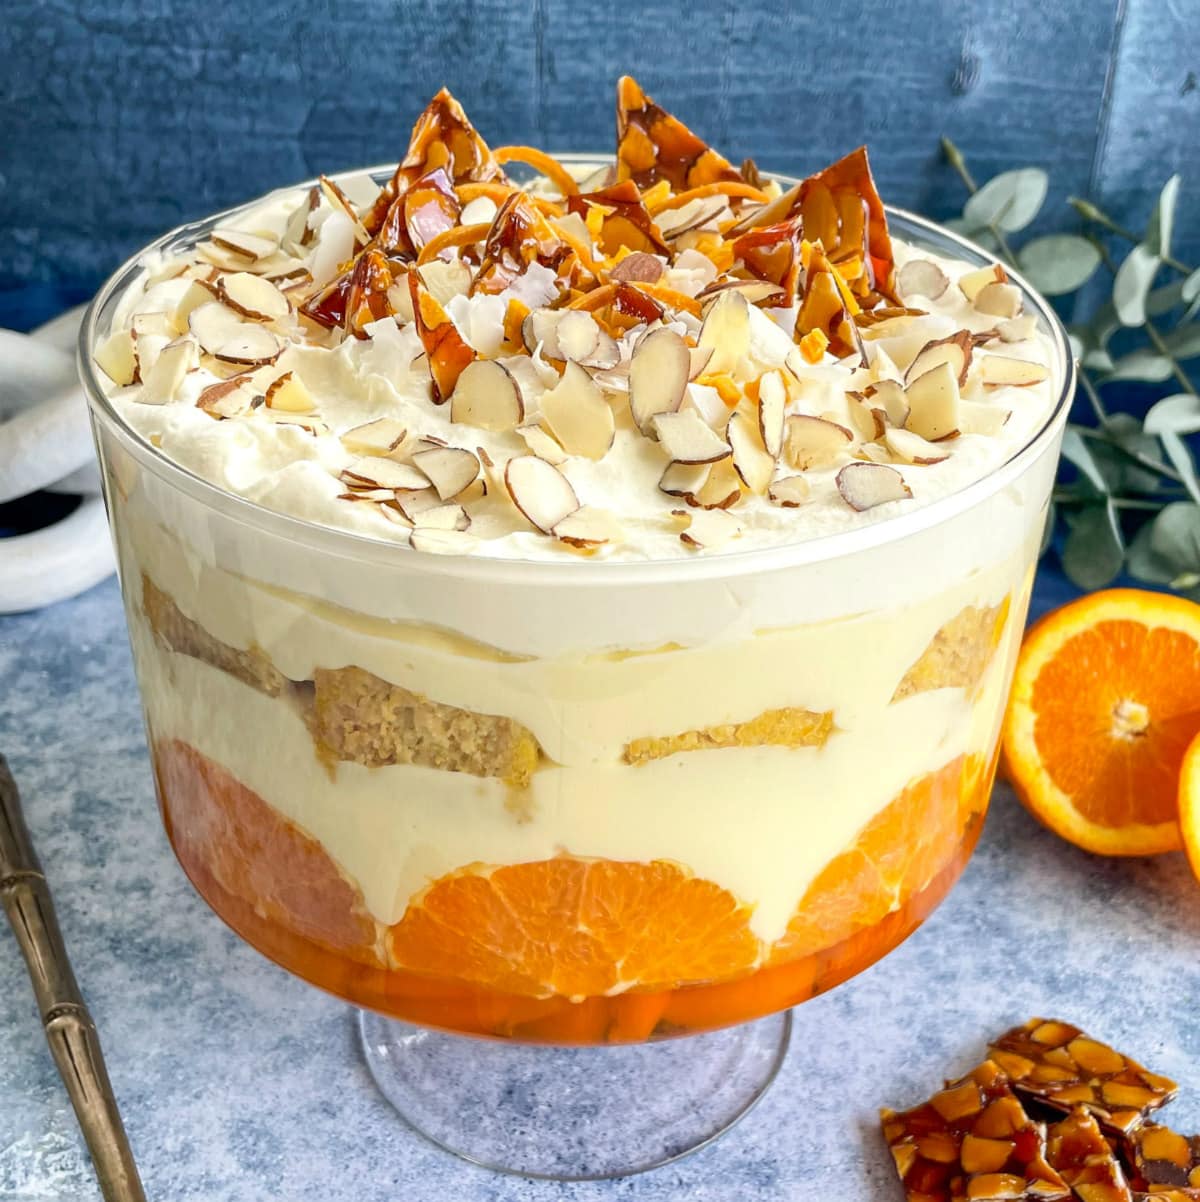 Orange Trifle with toppings of almond brittle, coconut, almonds and dried mango